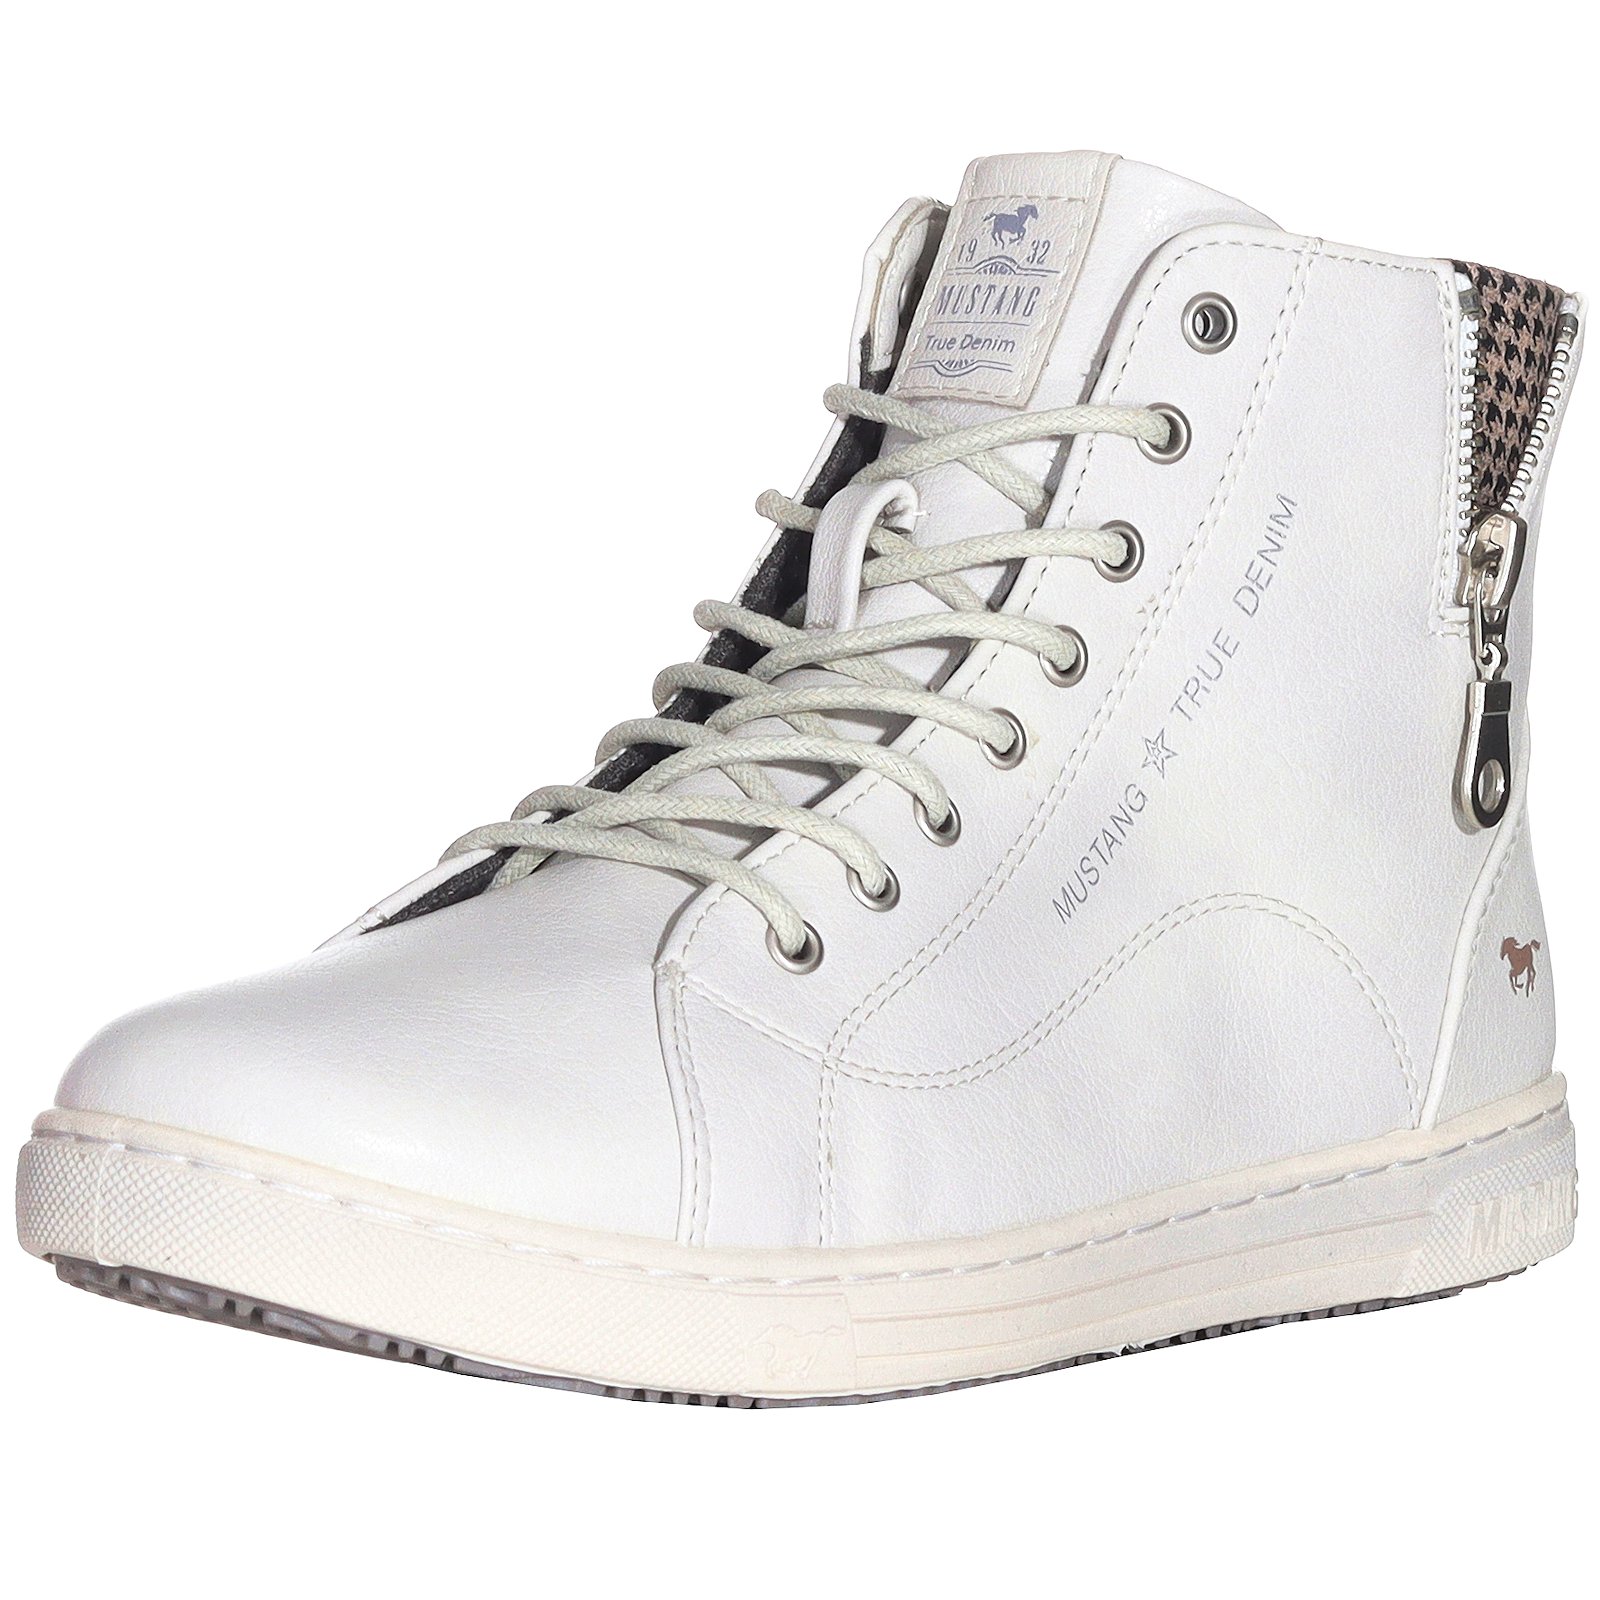 Diesel Leather MAGNETE S EXPOSURE high sneakers women - Glamood Outlet